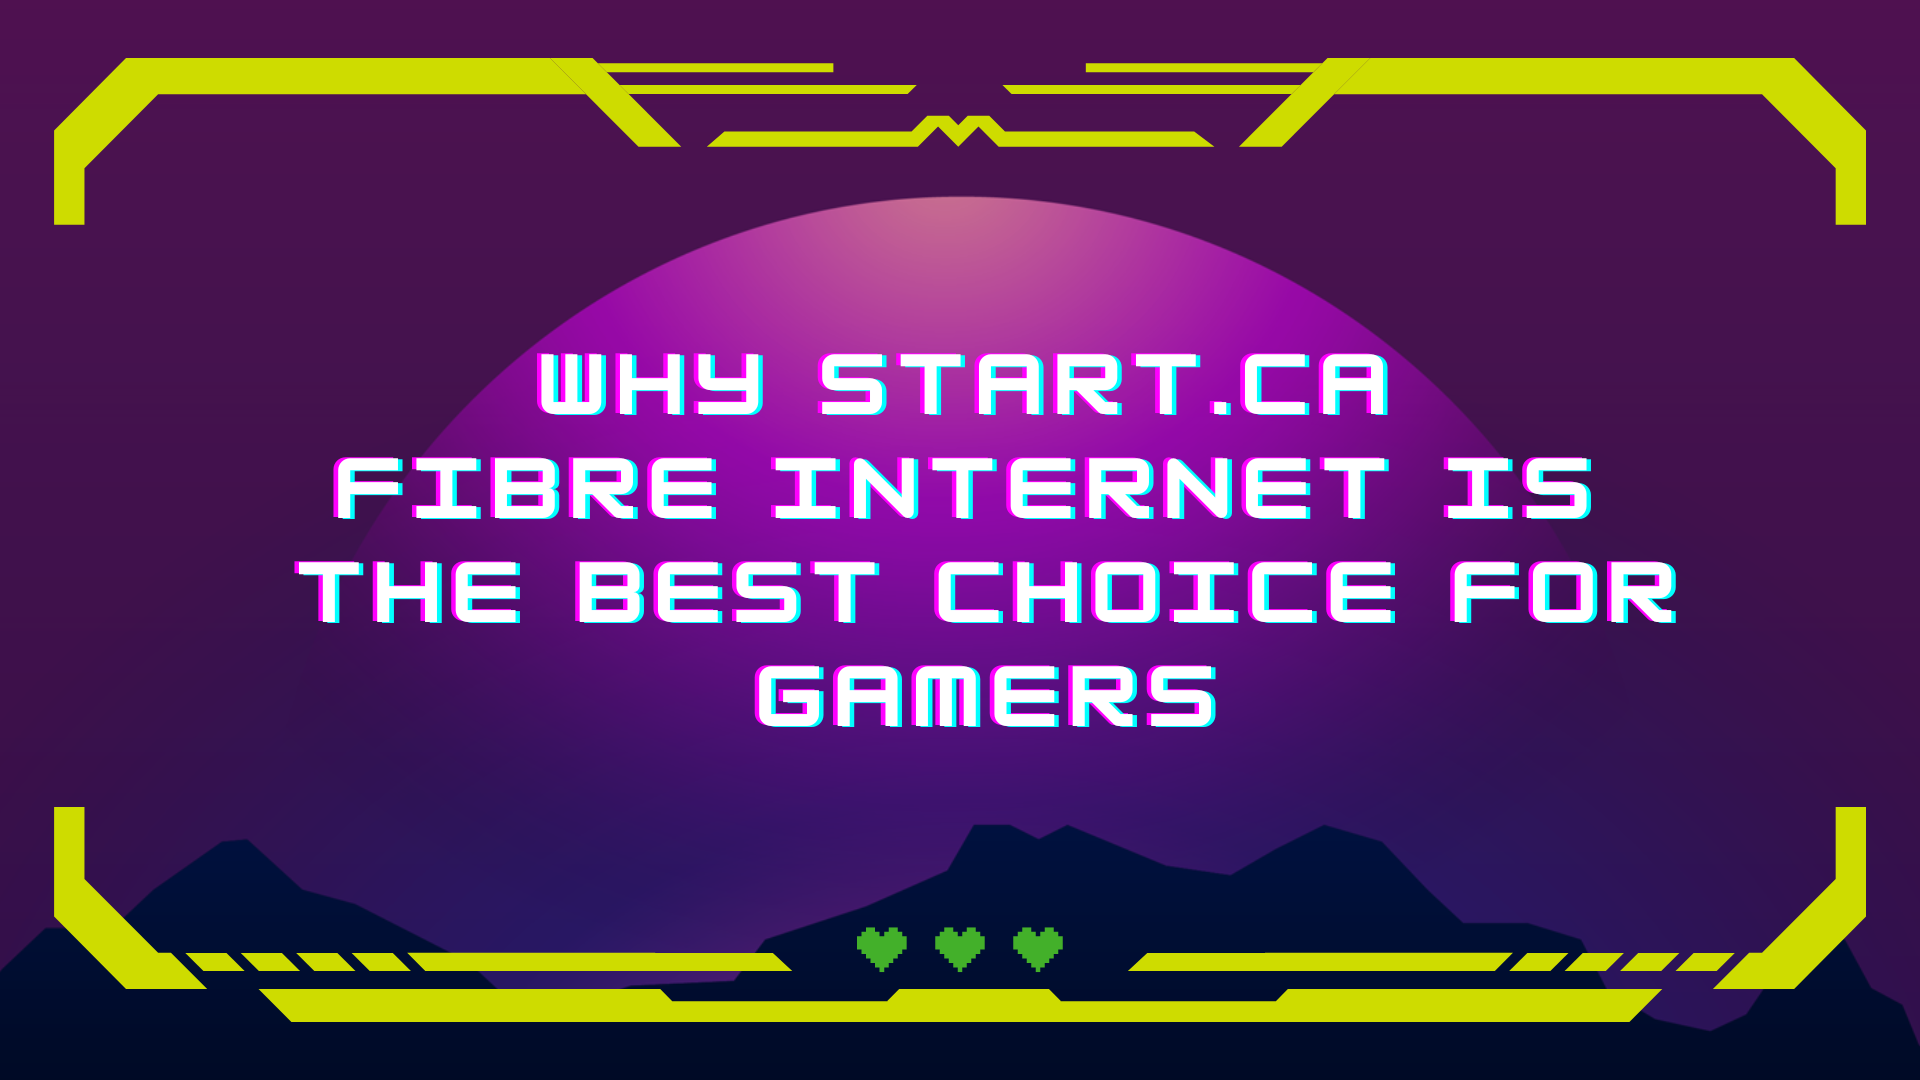 purple image styled like a gaming screen with text that reads "Why Start.ca Fibre Internet is the Best Choice for Gamers"